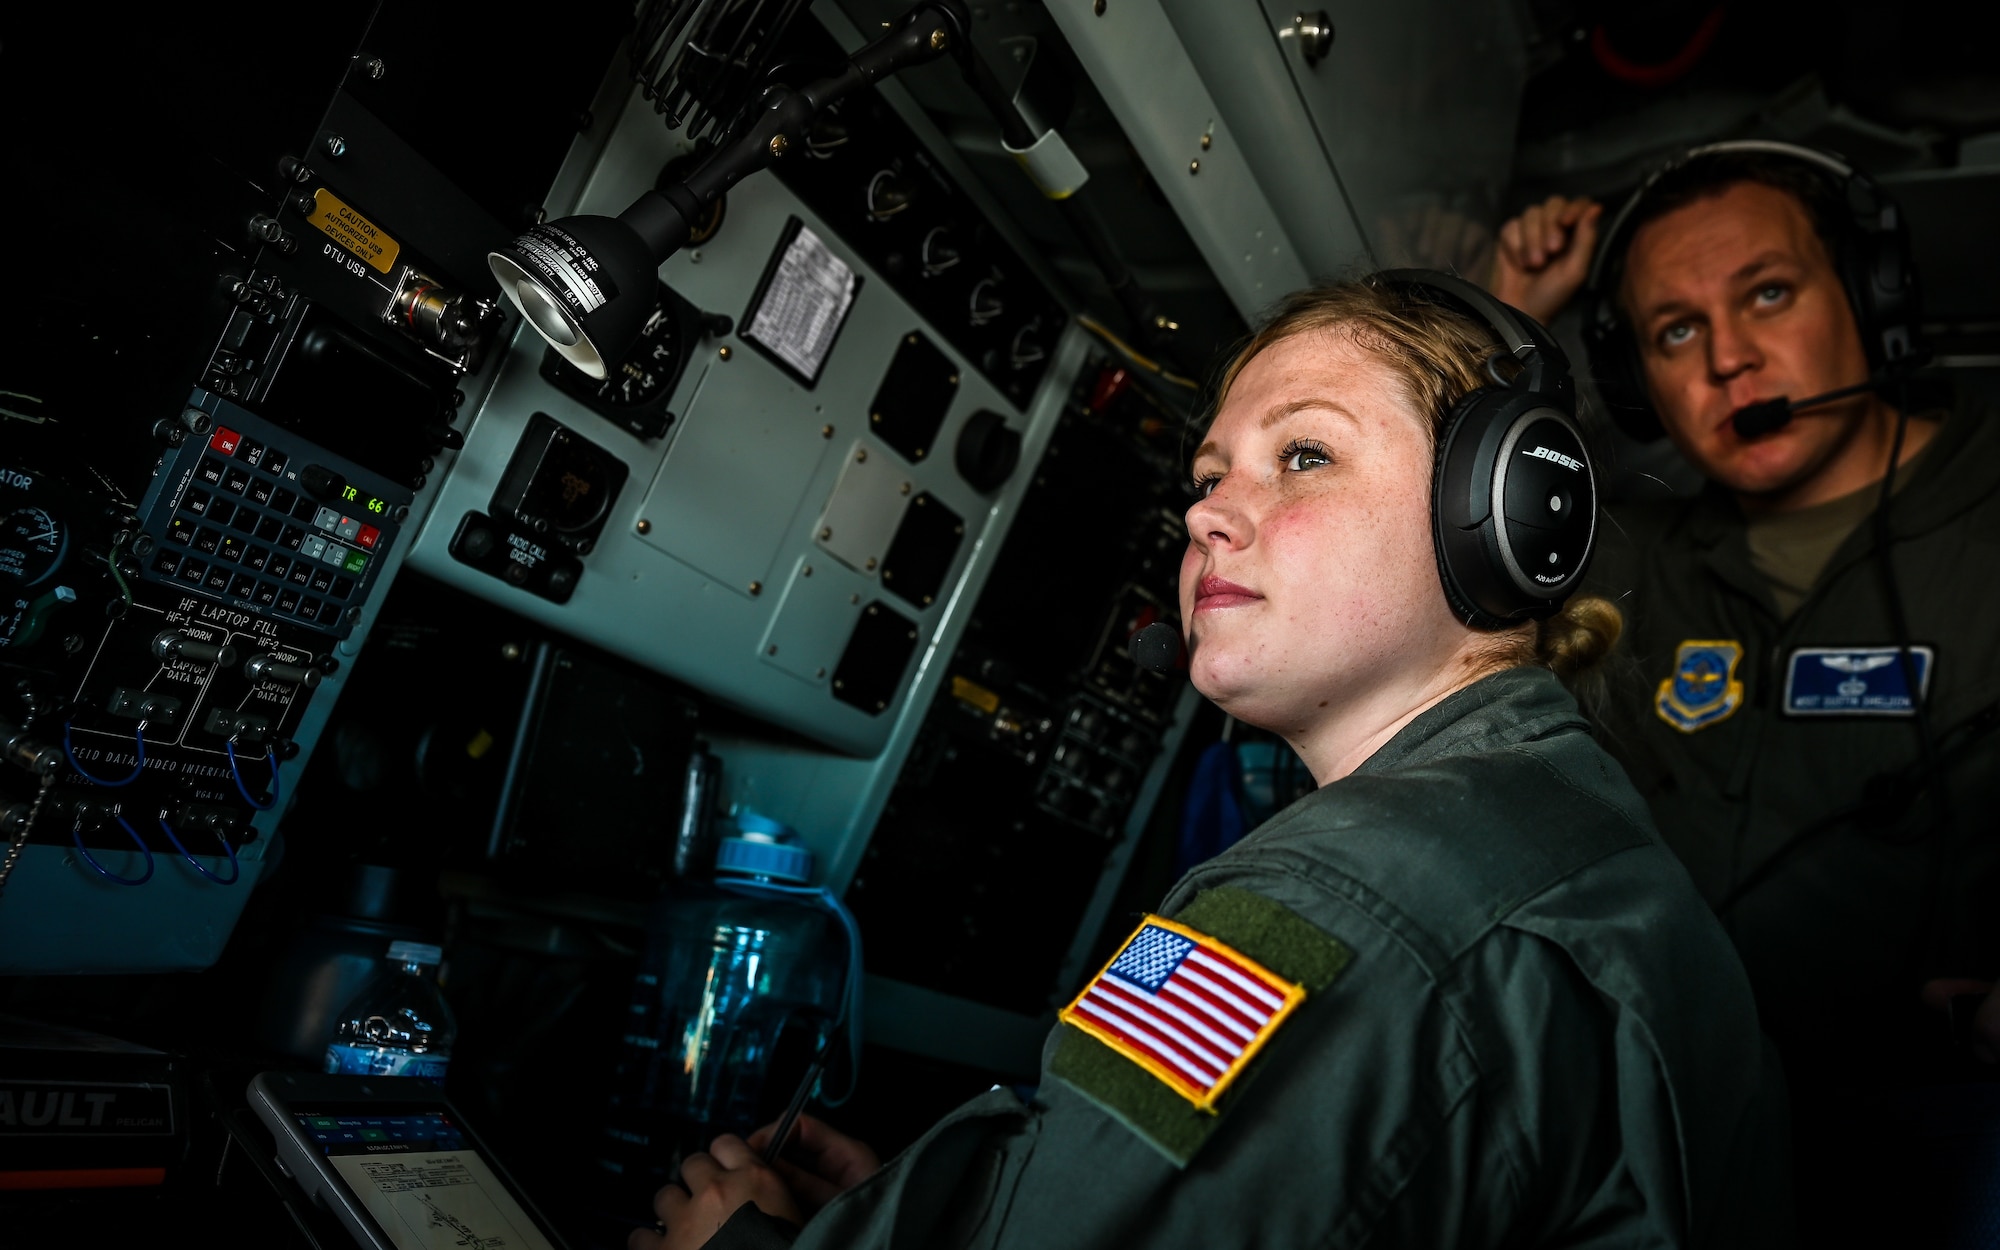 Airman 1st Class Cassandra Wesley, a 91st Air Refueling Squadron boom operator, trains alongside Master Sergeant Dustin Sheldon, a 91st ARS in-flight refueling instructor, during week-long integrated training at Barksdale Air Force Base, La., Dec. 14, 2020.